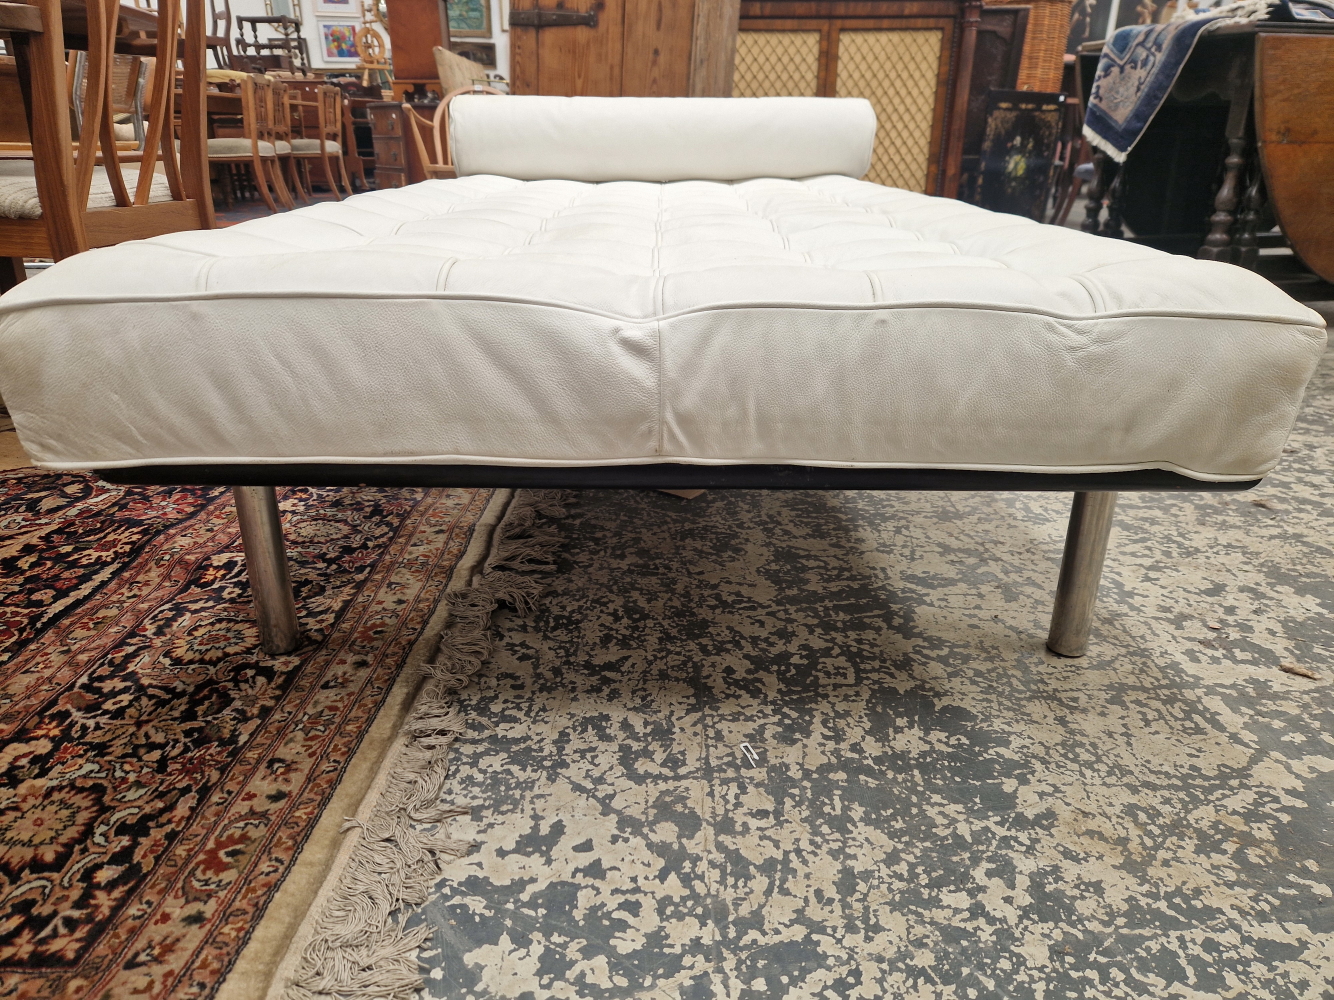 A VINTAGE DAY BED WITH METAL FRAME, CHROME LEGS AND WHITE LEATHER MATTRESS. - Image 3 of 6